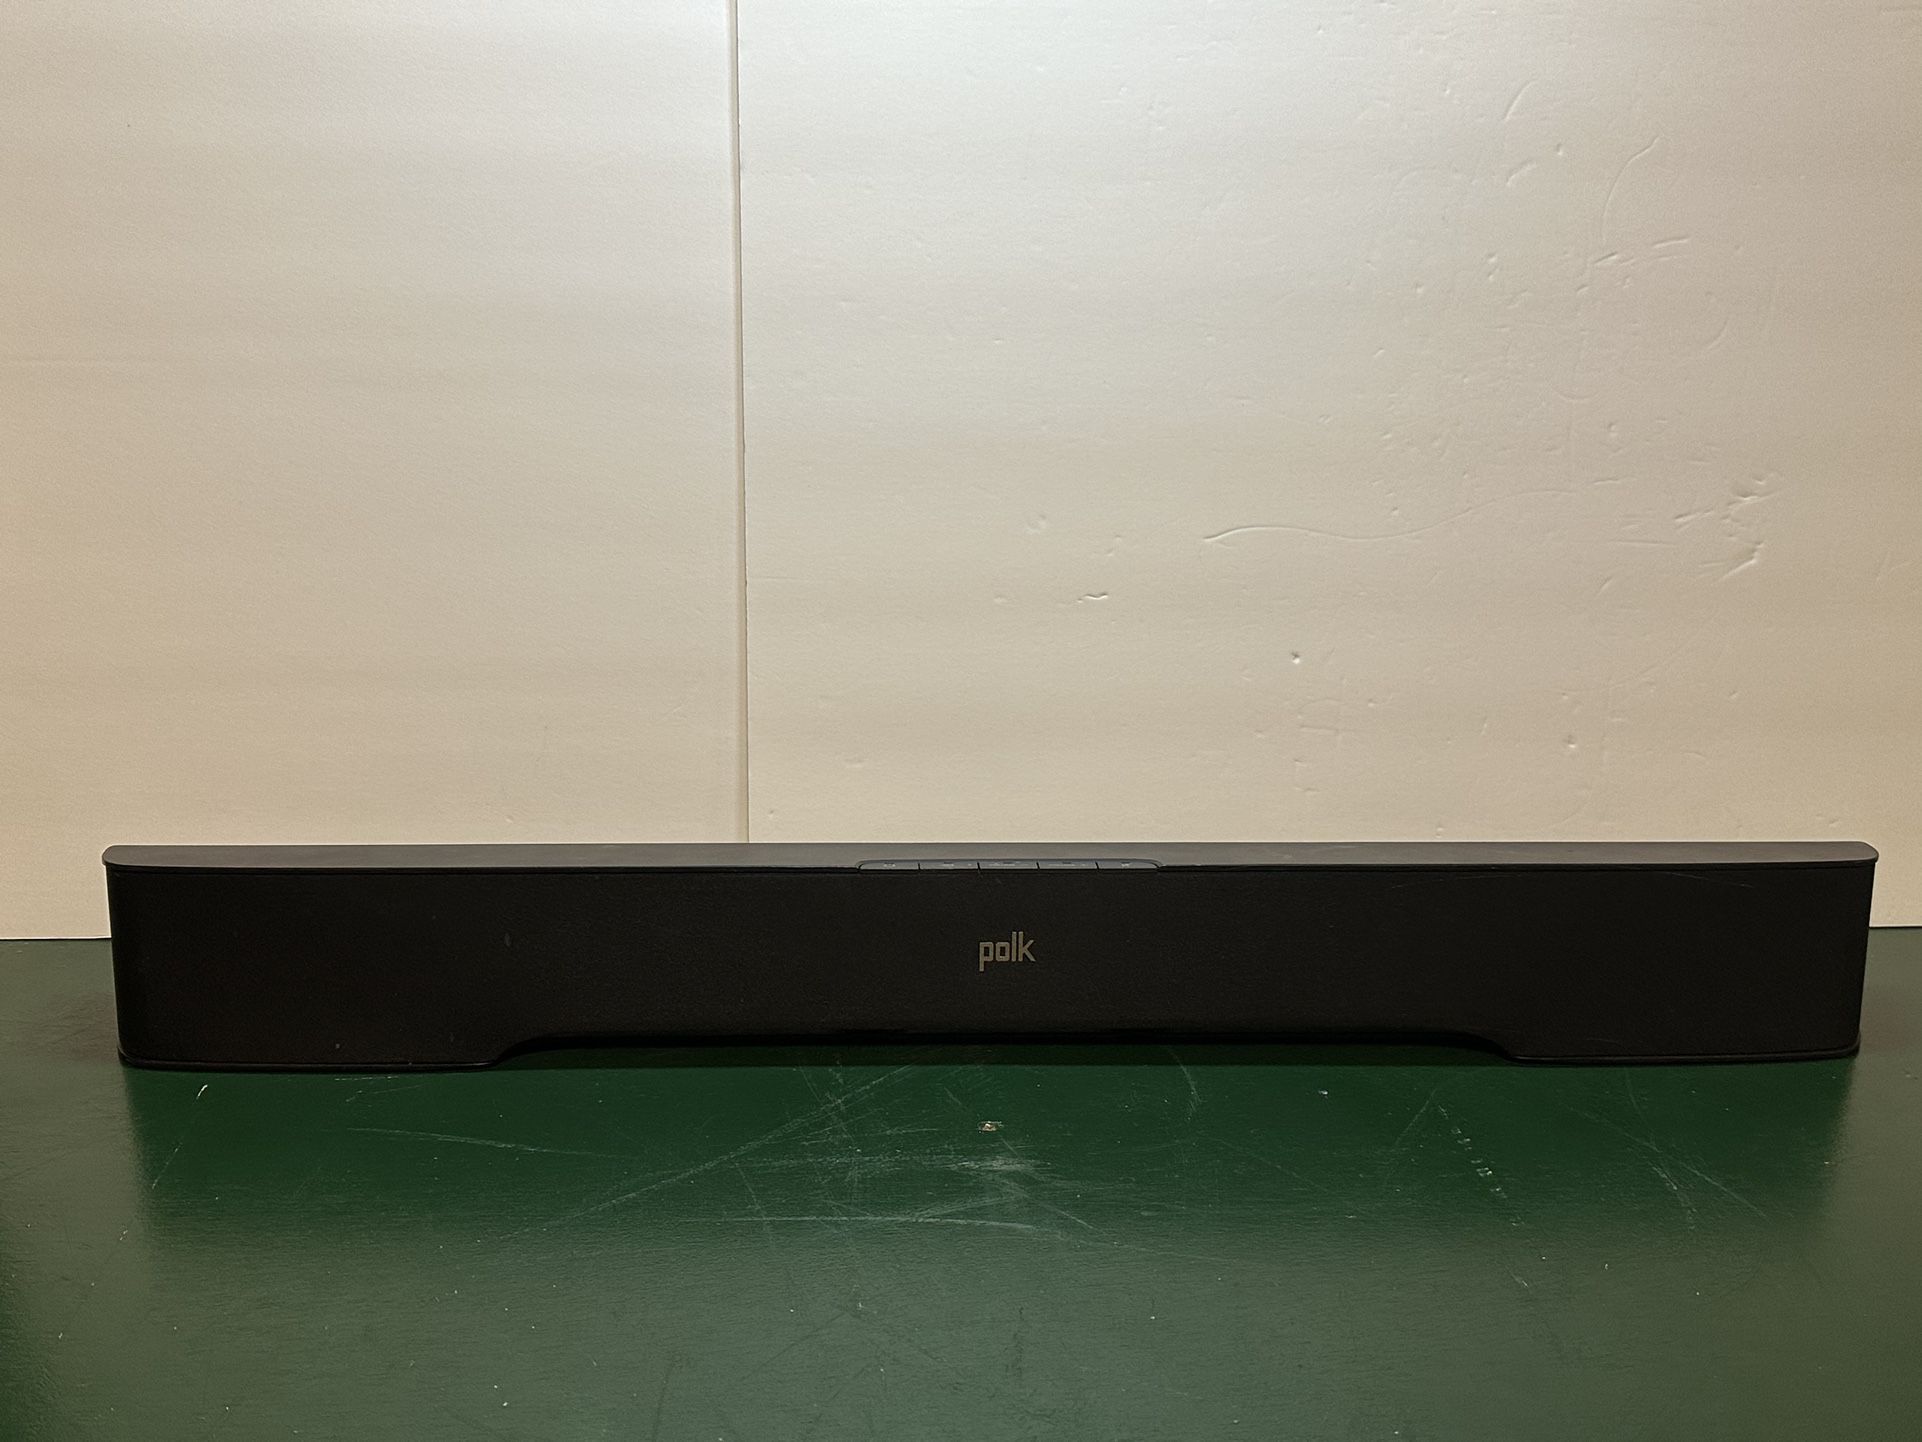 Polk DSB1 Sound Bar Bluetooth Home Audio Bar ONLY No Power Adapter Tested Works